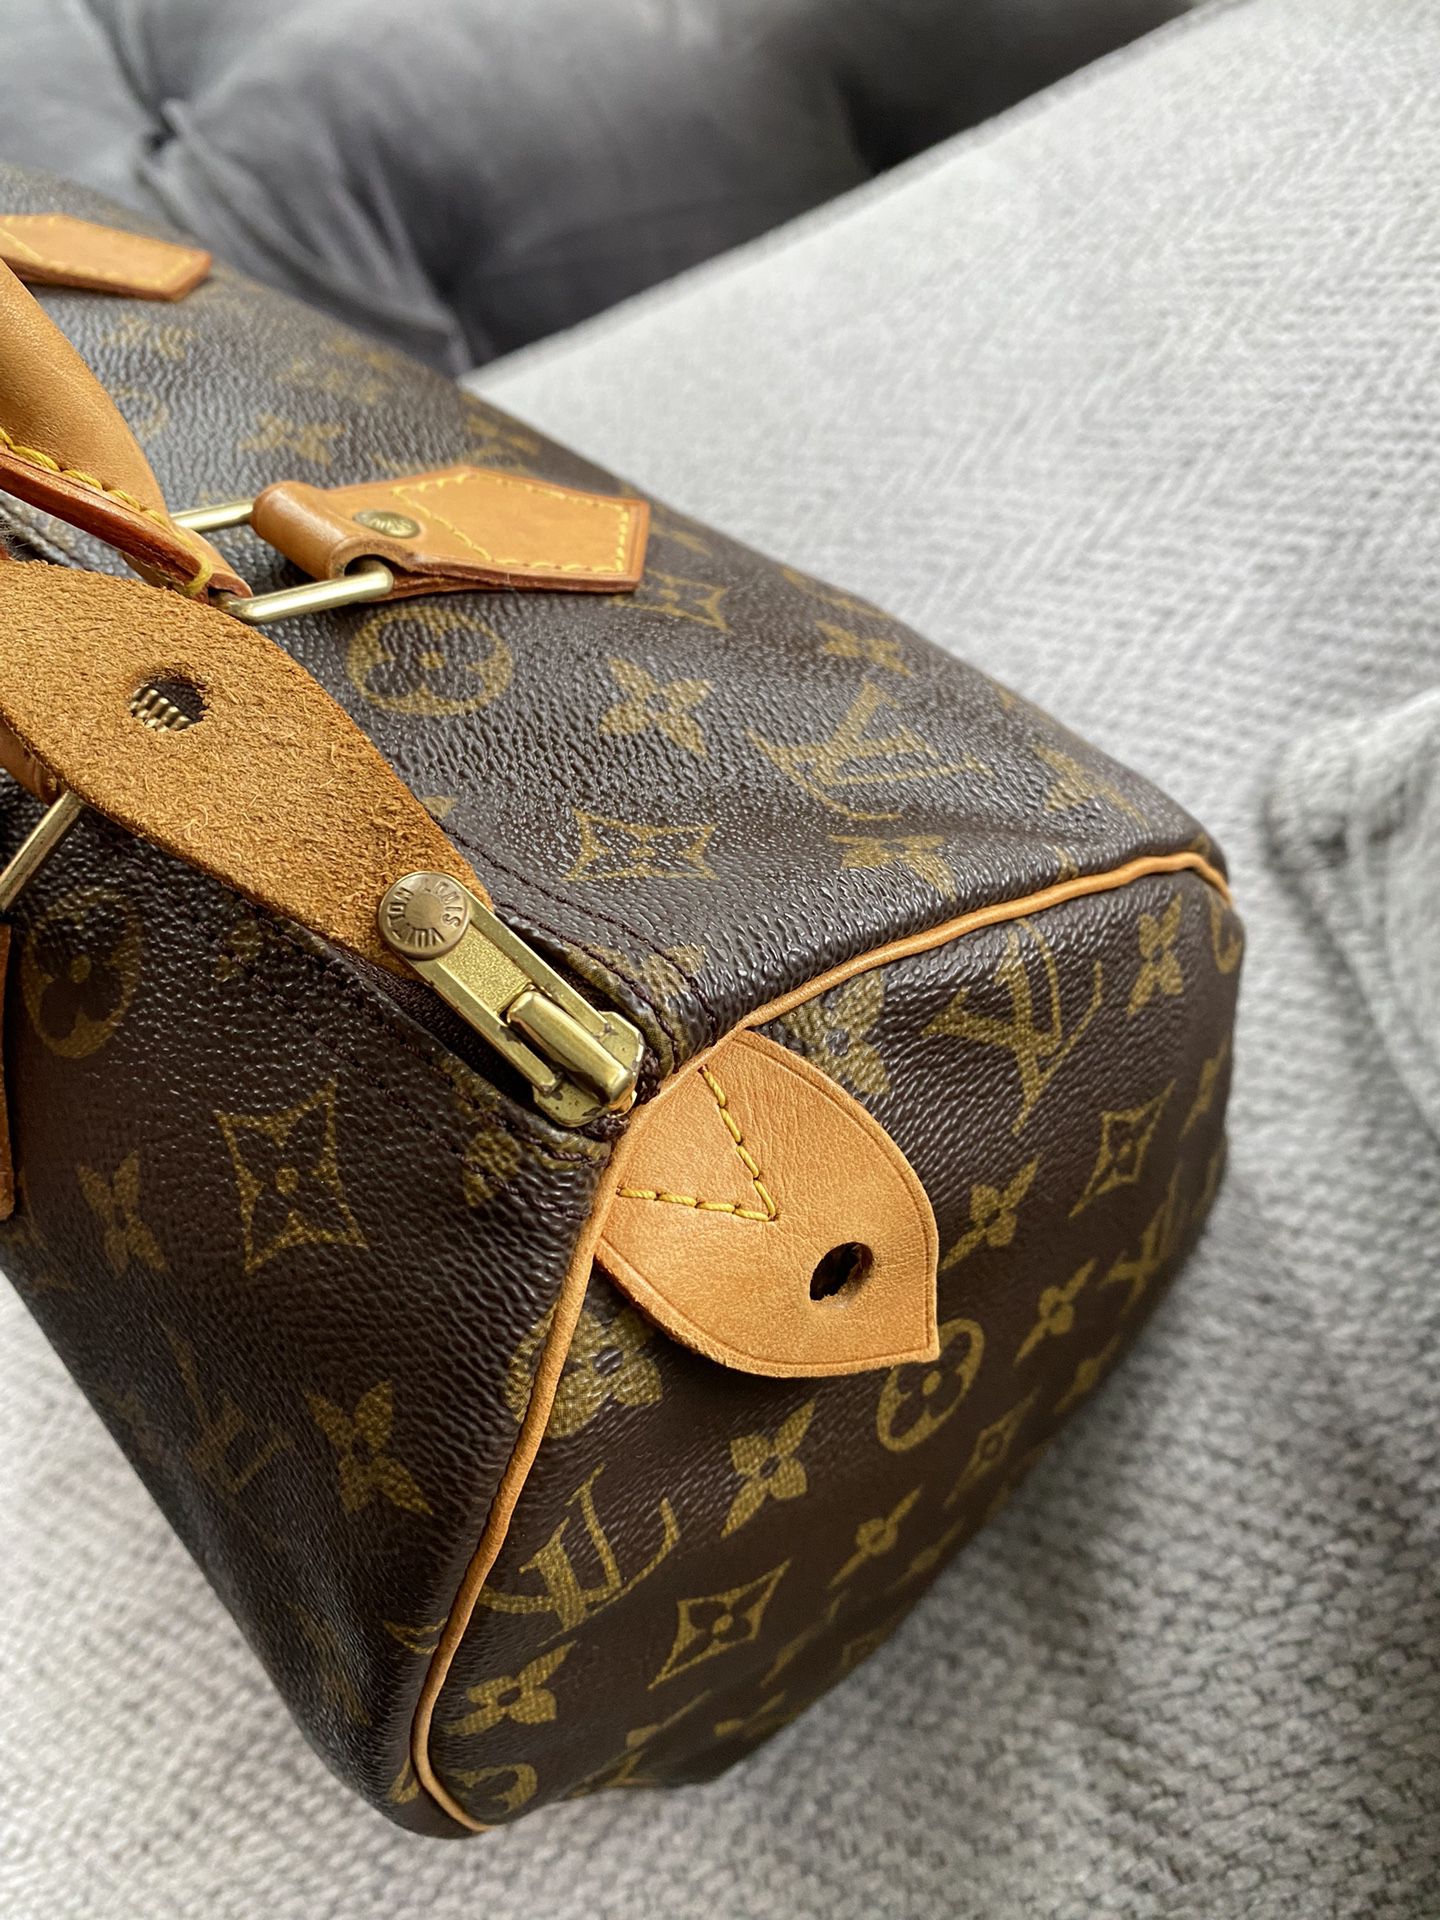 LV Speedy 30. Guaranteed Authentic. for Sale in Oldsmar, FL - OfferUp